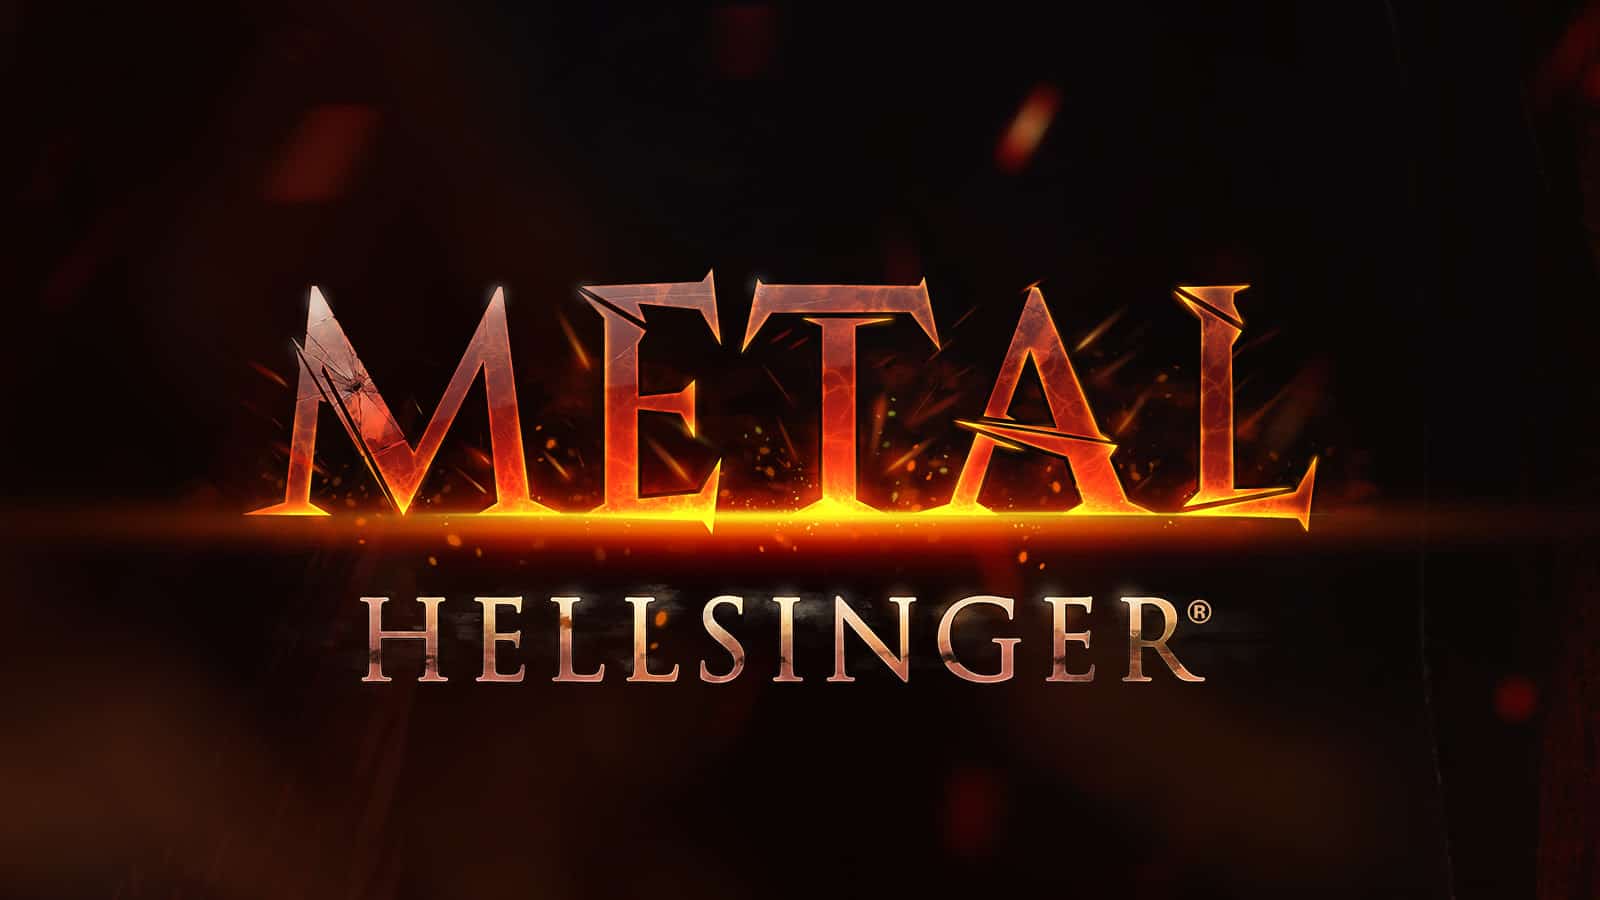 Funcom Press Center - Metal: Hellsinger wins “Most Wanted PC Game